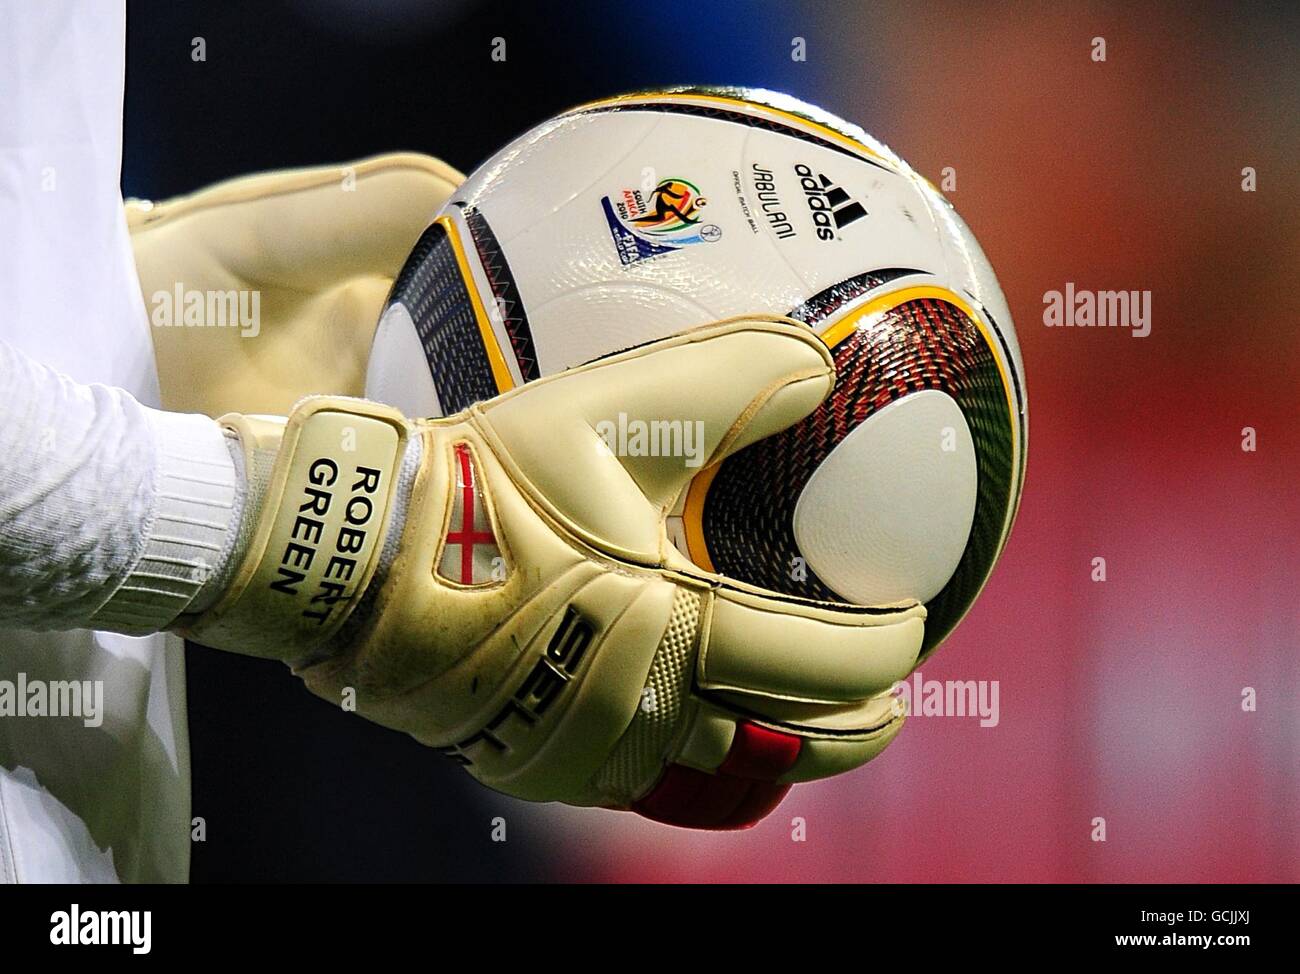 The Adidas Jabulani World Cup match ball in the hands of England goalkeeper Robert Green prior to kick off Stock Photo